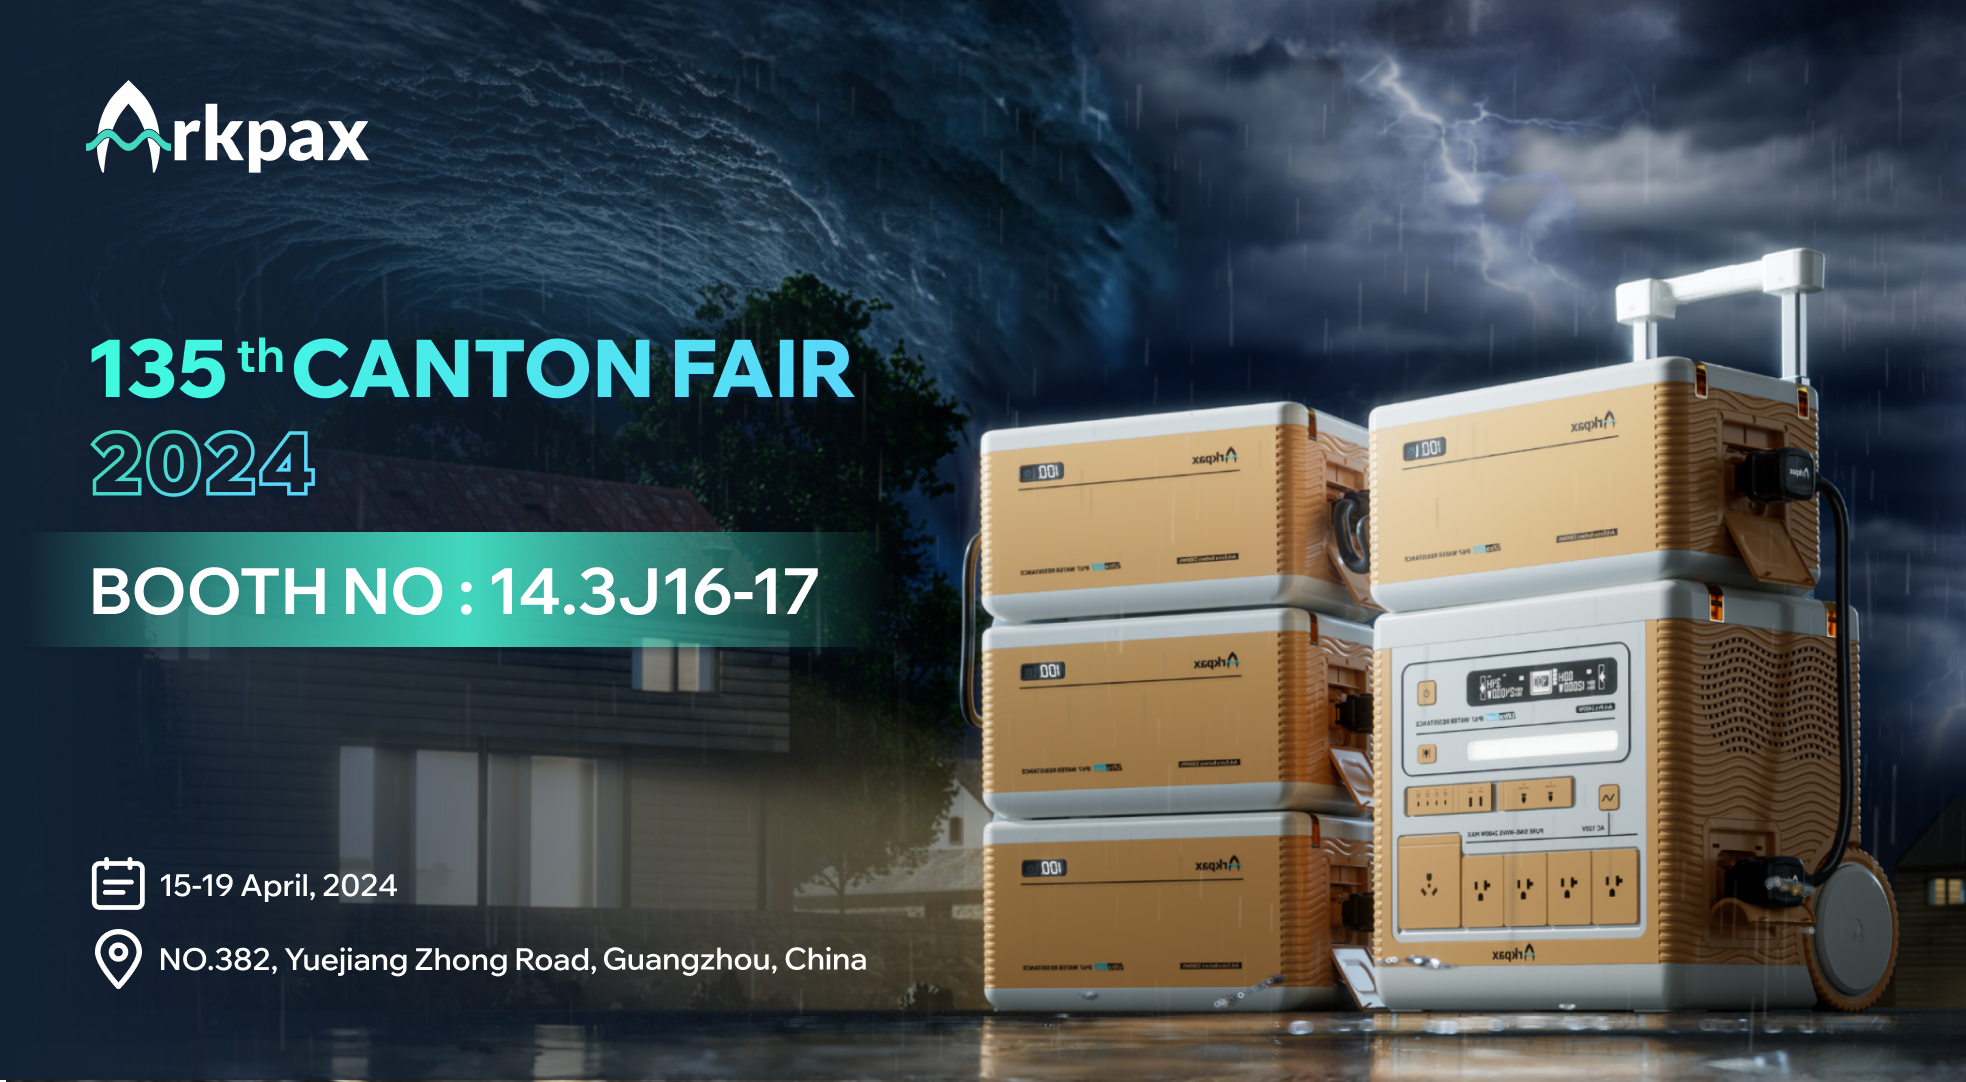 Discover Disaster Relief Backup Power at the 135th Canton Fair with Arkpax